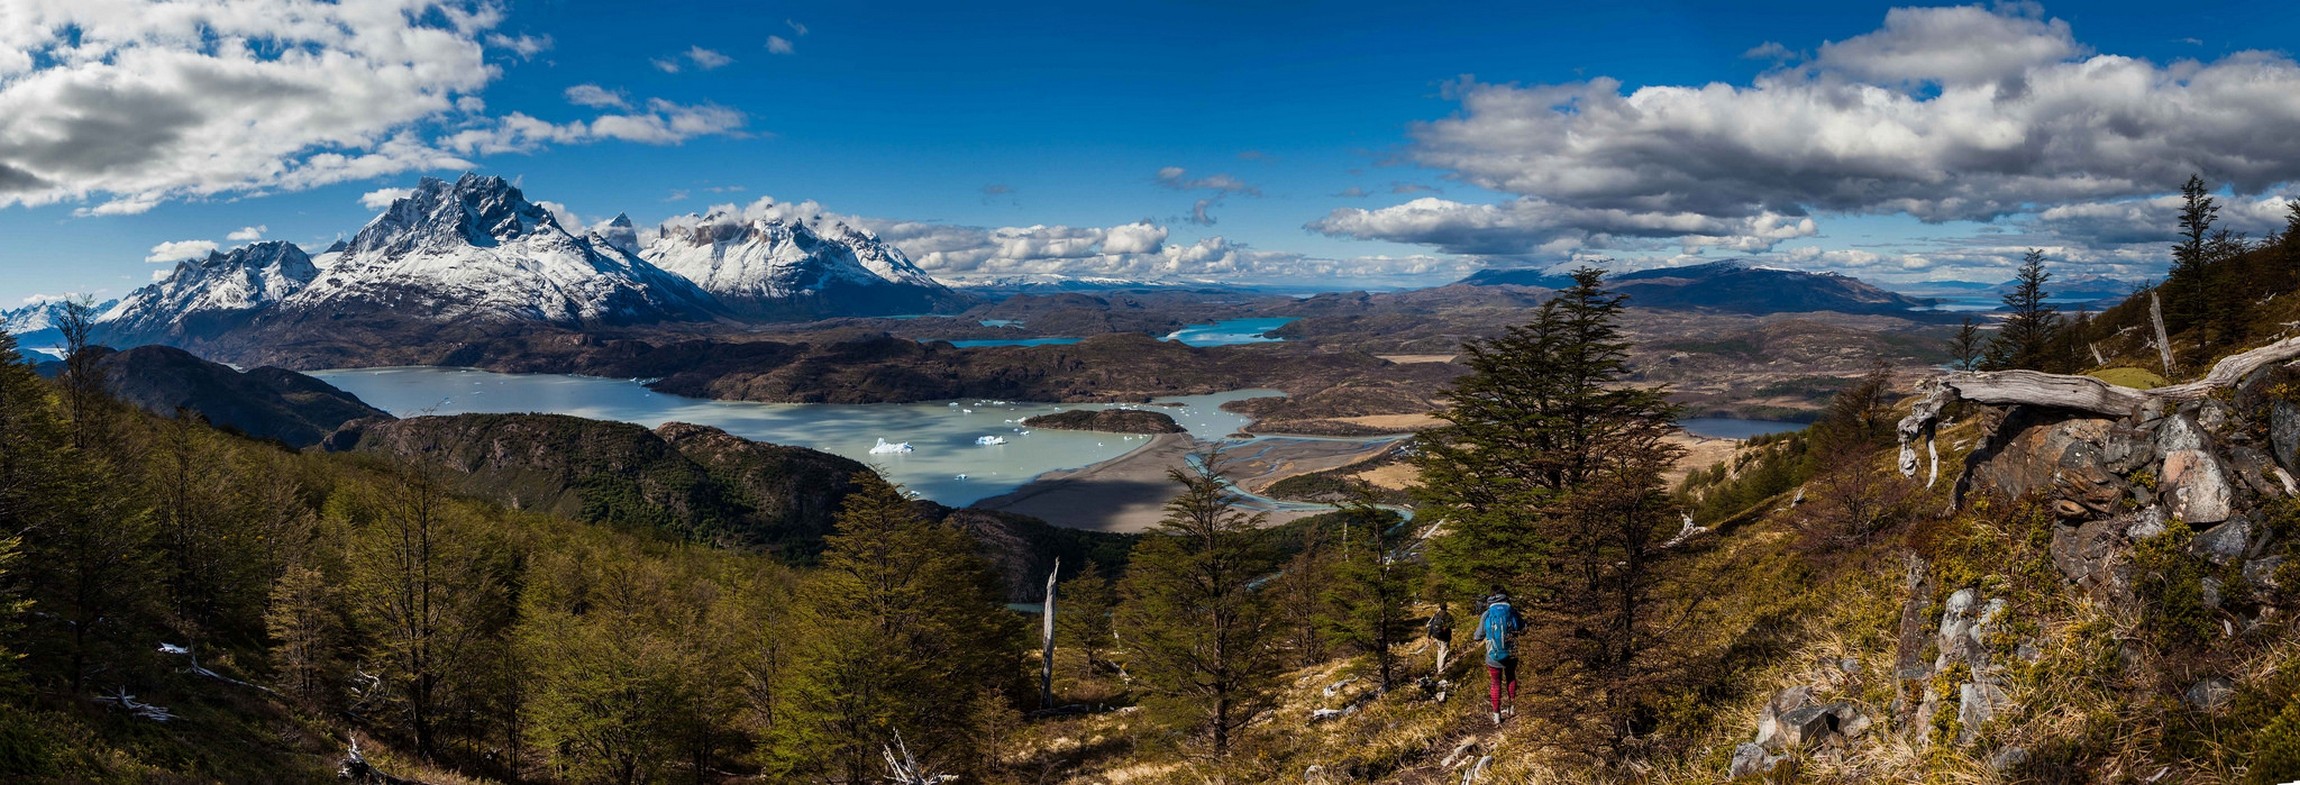 General 2300x785 nature photography landscape panorama mountains river clouds forest hiking snowy peak trees Torres del Paine Patagonia Chile South America